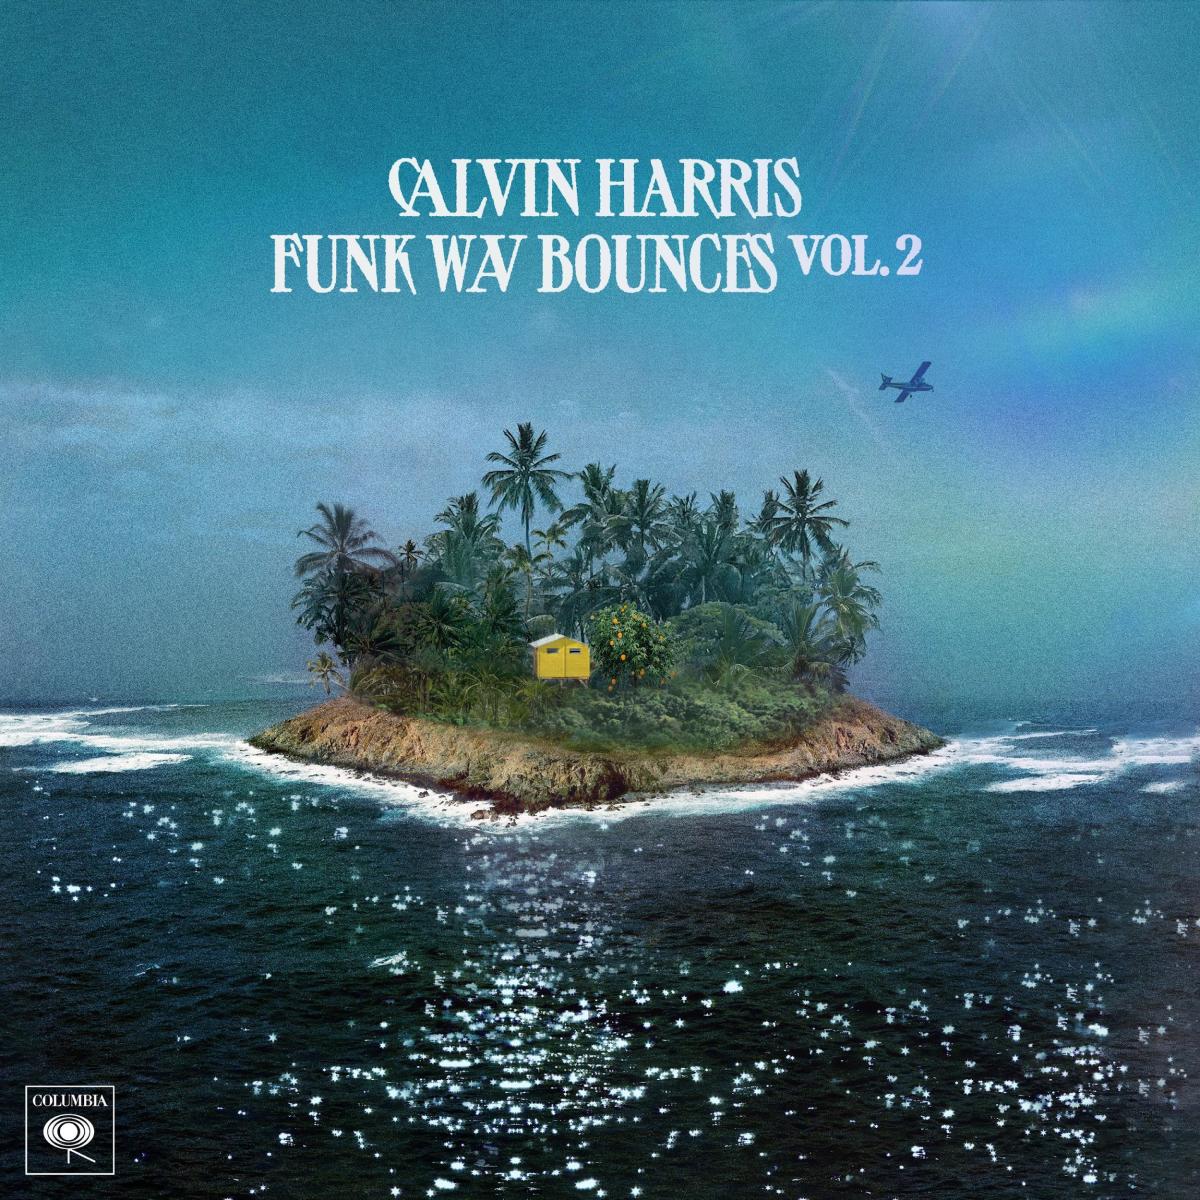 The cover art of of Calvin Harris' "Funk Wav Bounces Vol. 2" album, which features Justin Timberlake, Halsey, Pharrell, Snoop Dogg, Tinashe and more.